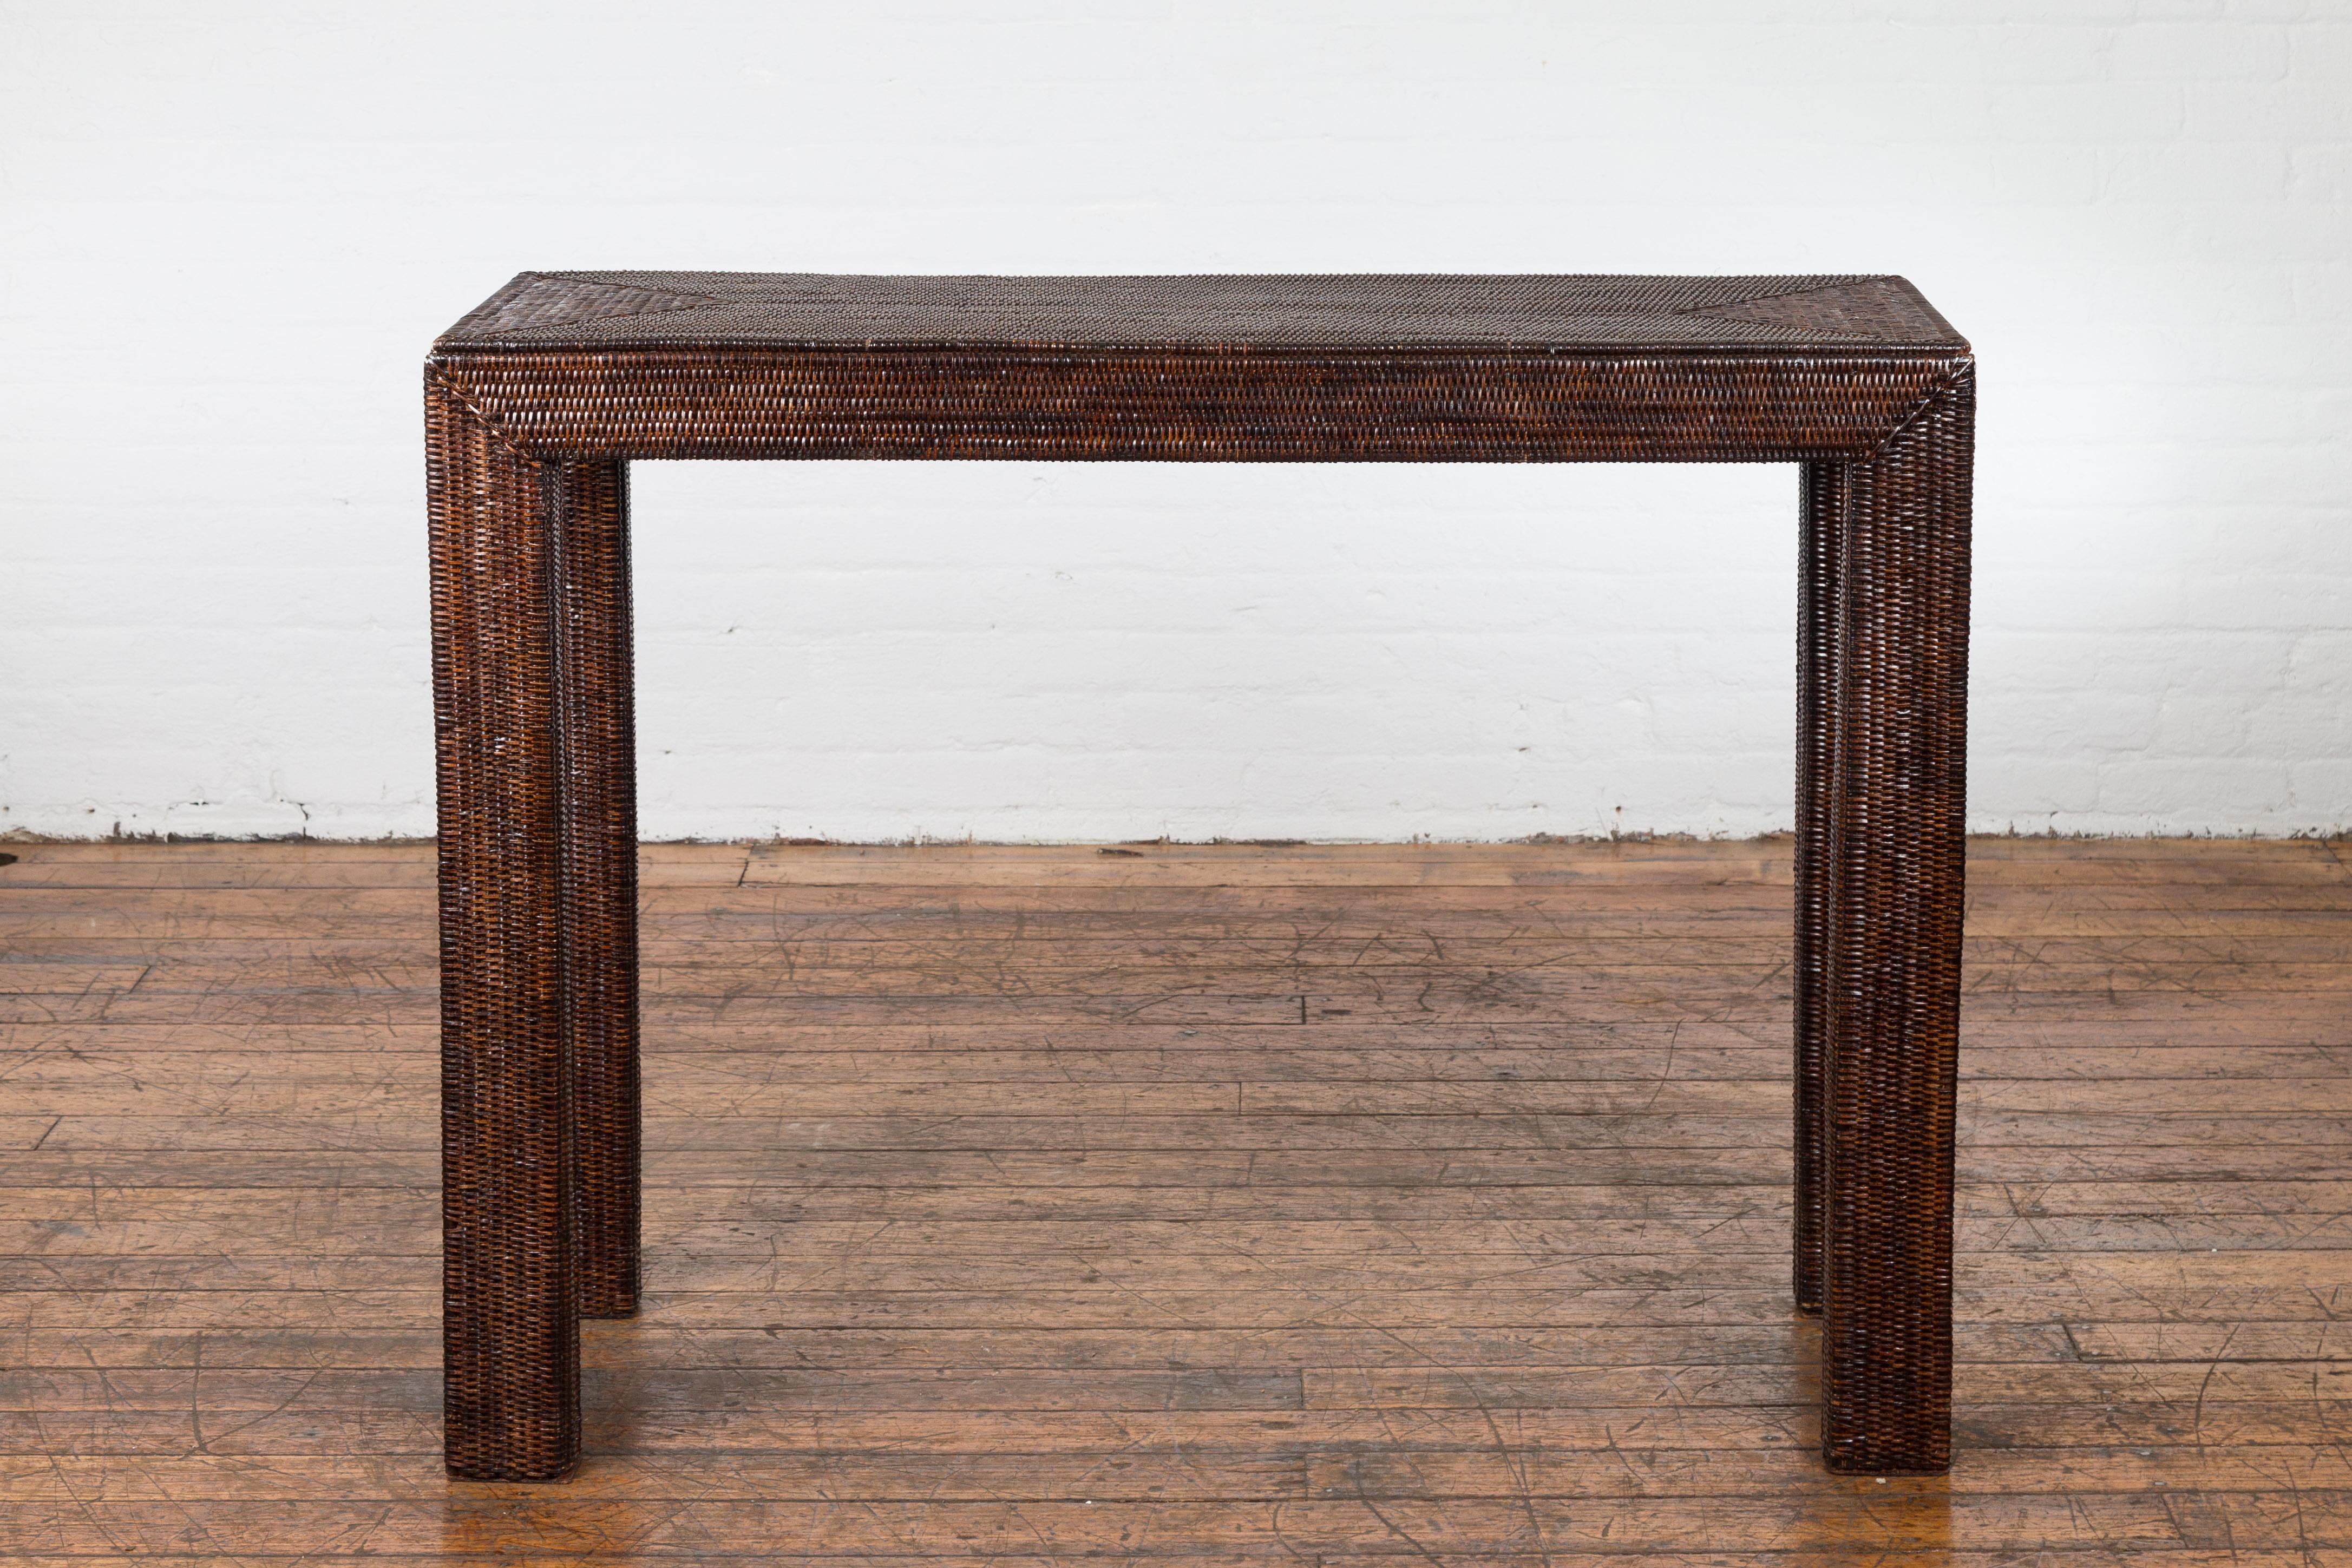 A Burmese Country style woven rattan console table from the Mid-20th Century, with straight legs, dark brown finish and triangular patterns. We currently have two tables available, the first one measuring 33 inches of height and the second one 34